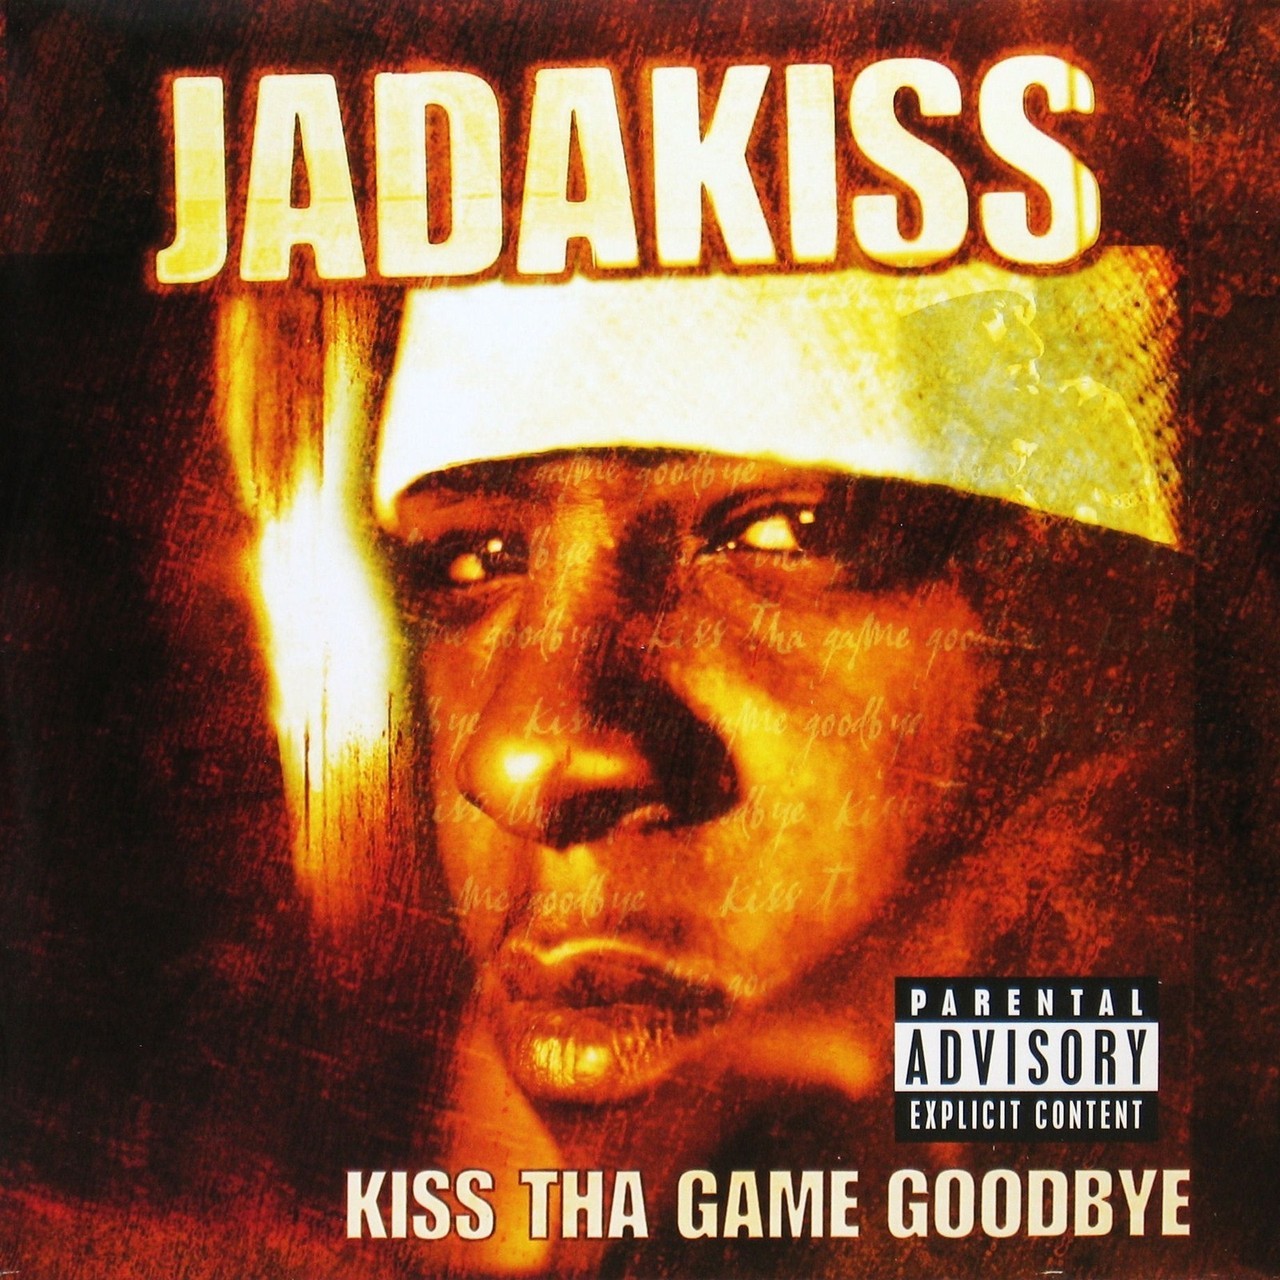 BACK IN THE DAY |8/7/01| Jadakiss releases his debut album, Kiss tha Game Goodbye,